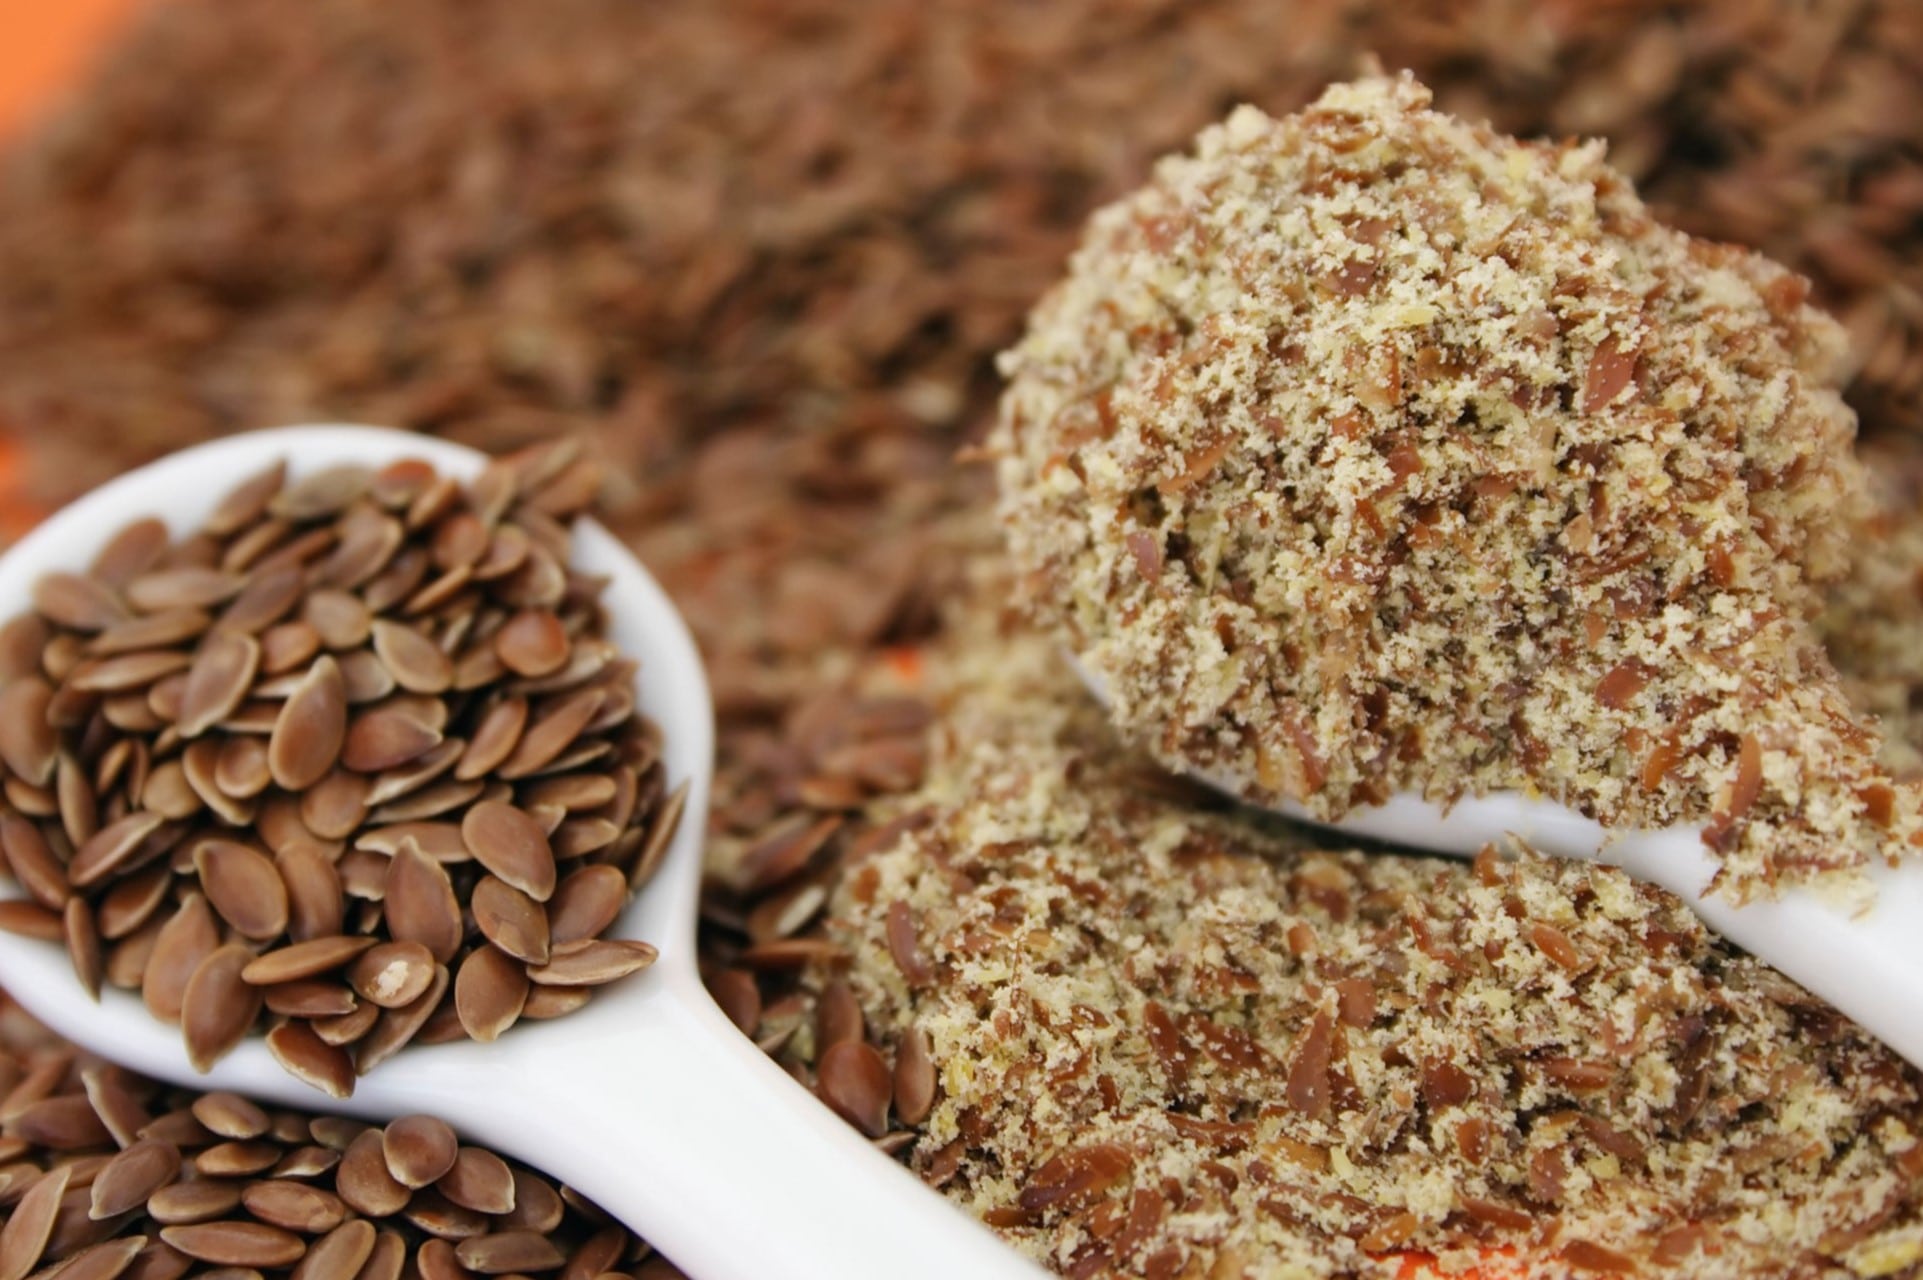 How Can I Eat Flax Seeds